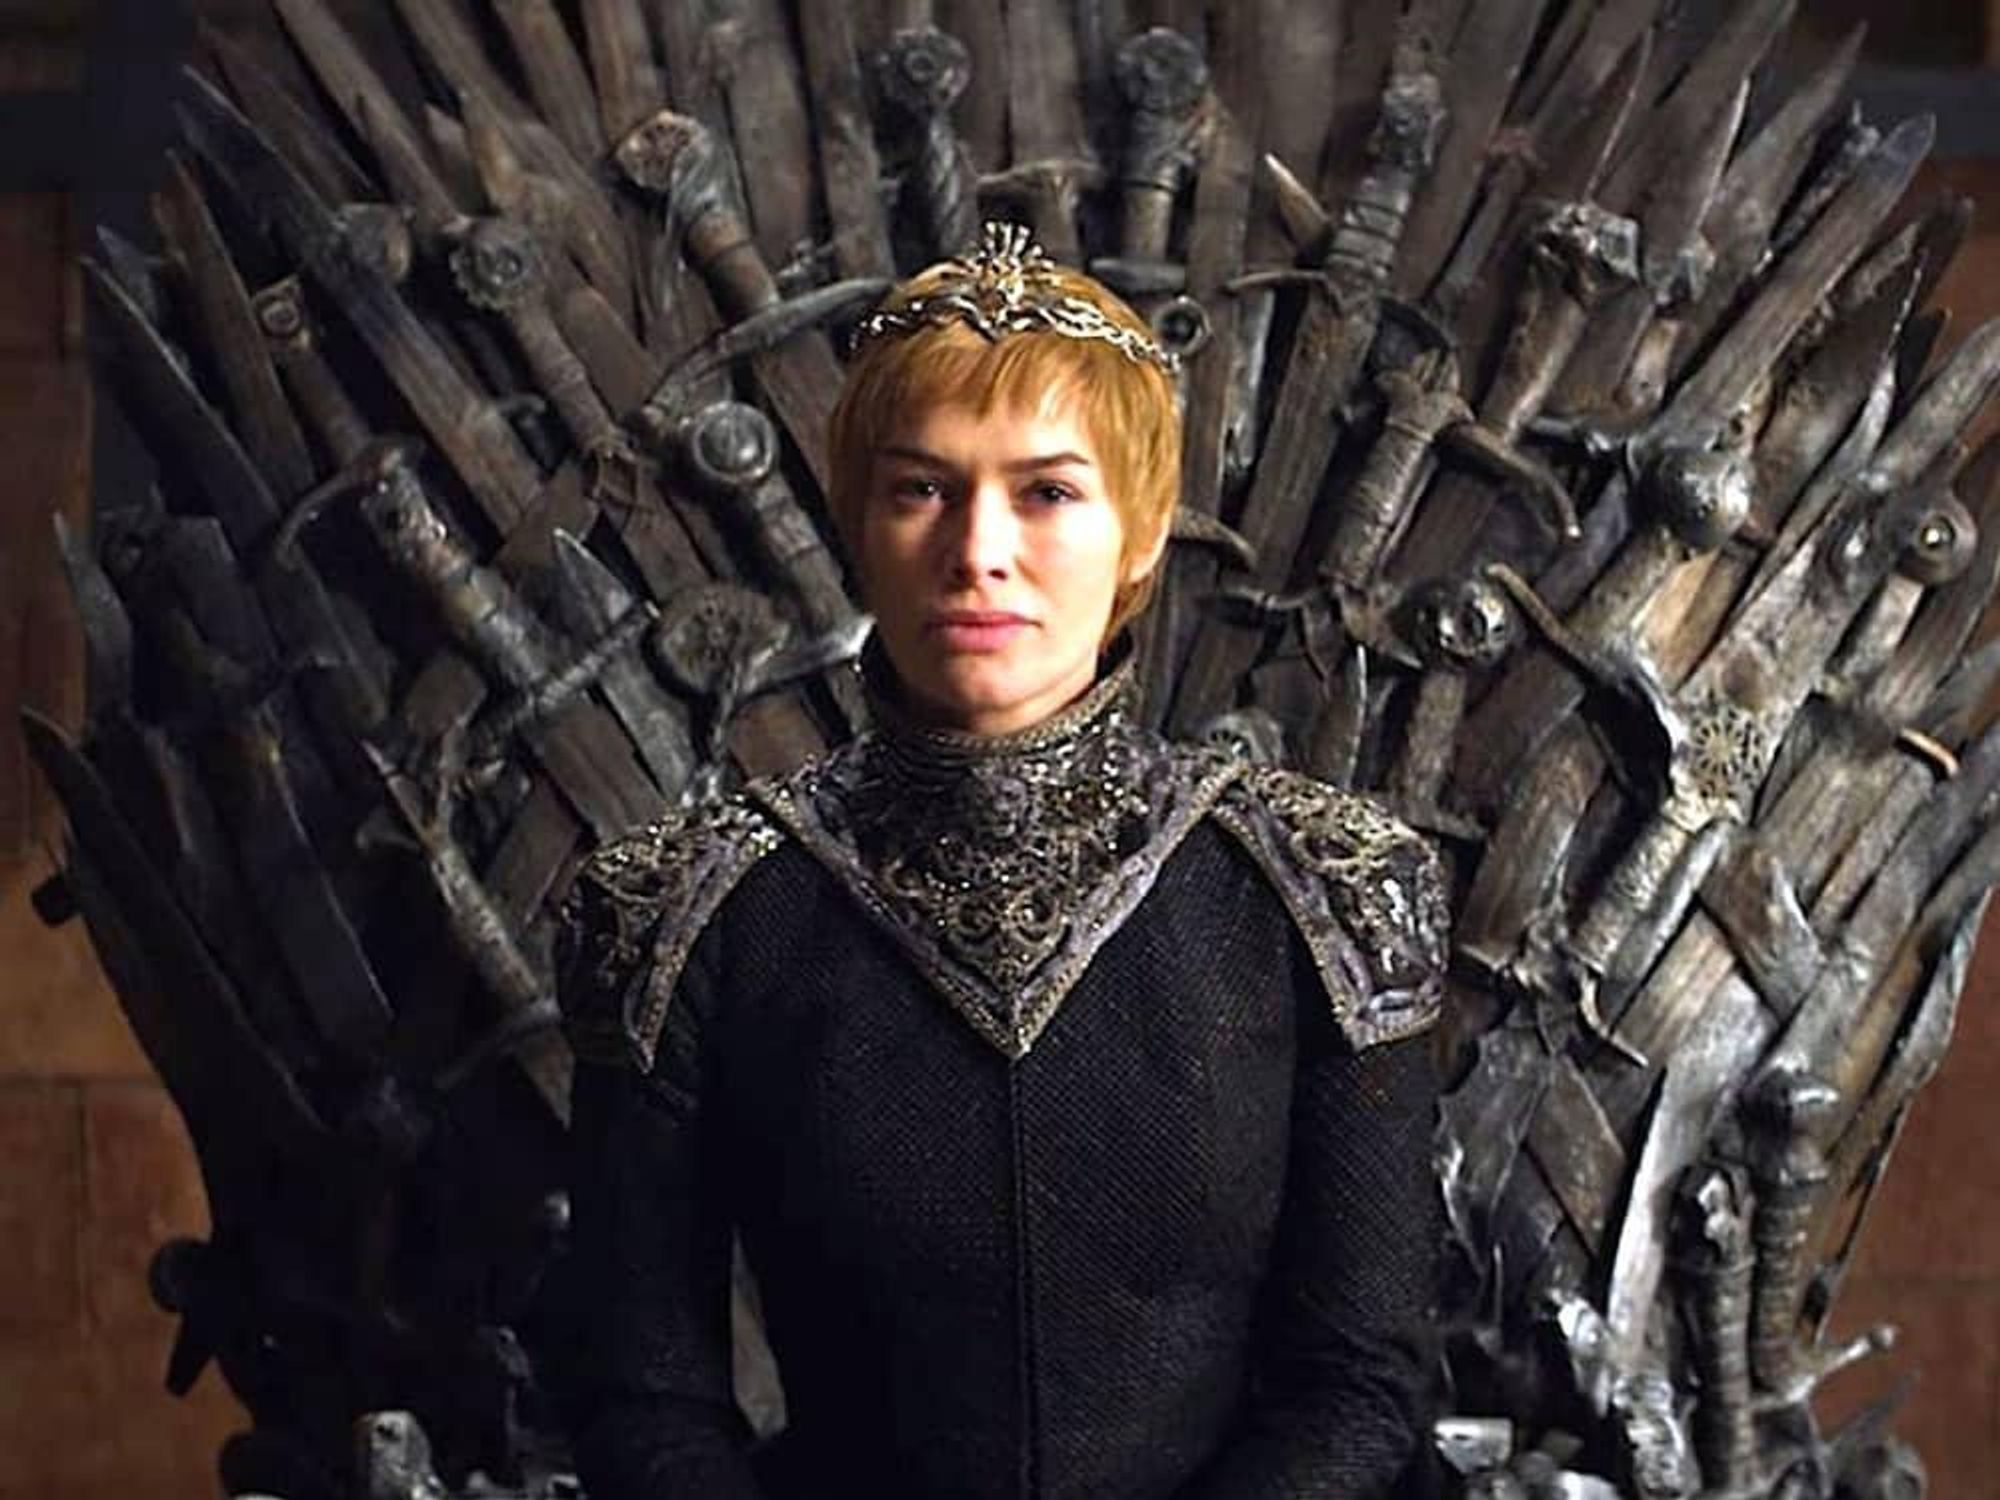 Houston, game of thrones, July 2017, cersei